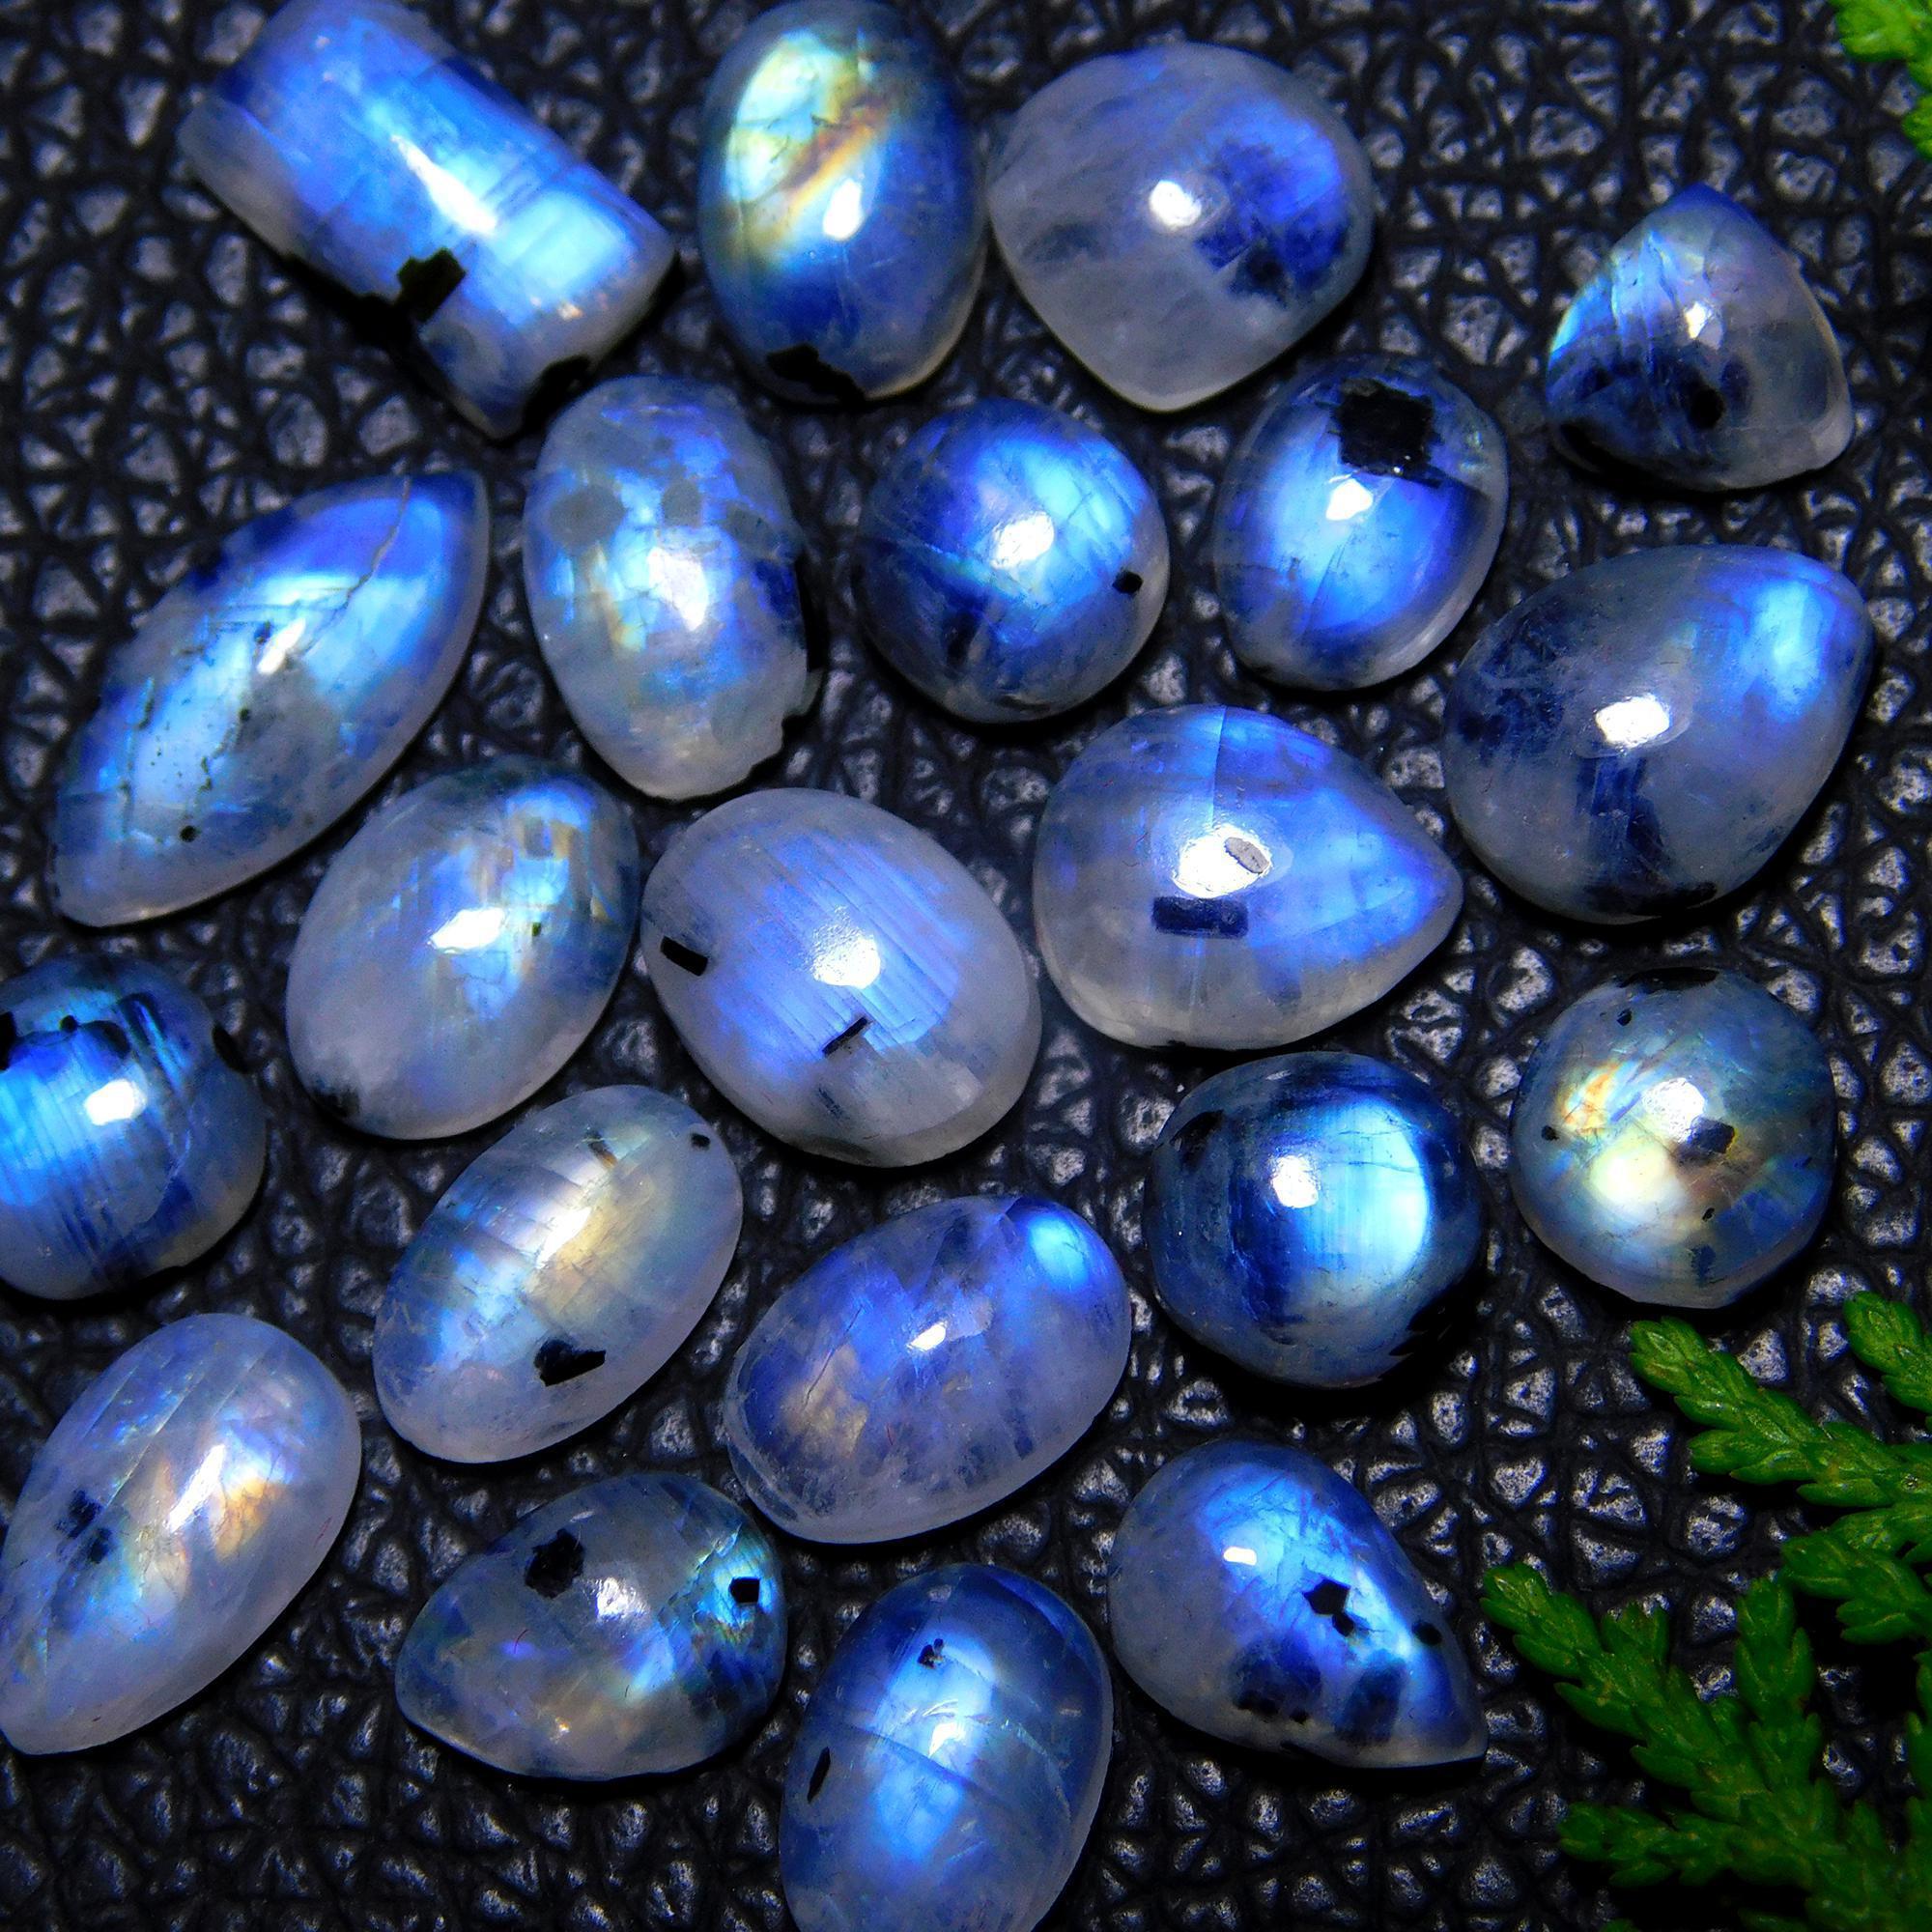 21Pcs 48Cts Natural Rainbow Moonstone Cabochon Blue Fire Loose Gemstone Crystal jewelry supplies wholesale lot gift for her Black Friday  11X6 7X7mm#9426